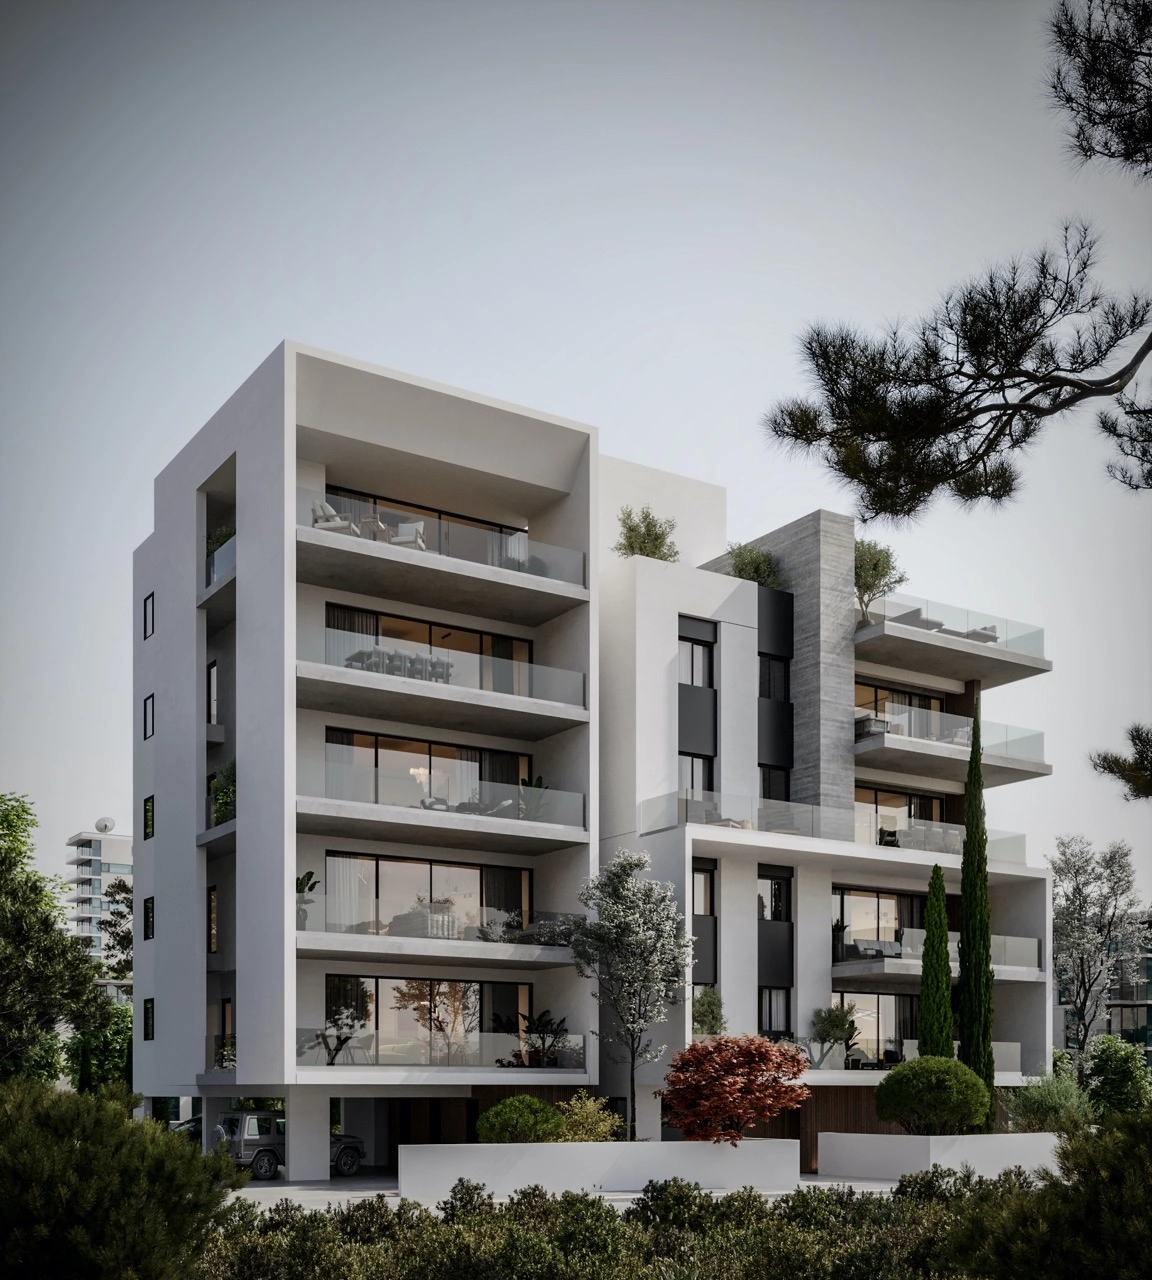 2 Bedroom Apartment for Sale in Strovolos – Dasoupolis, Nicosia District